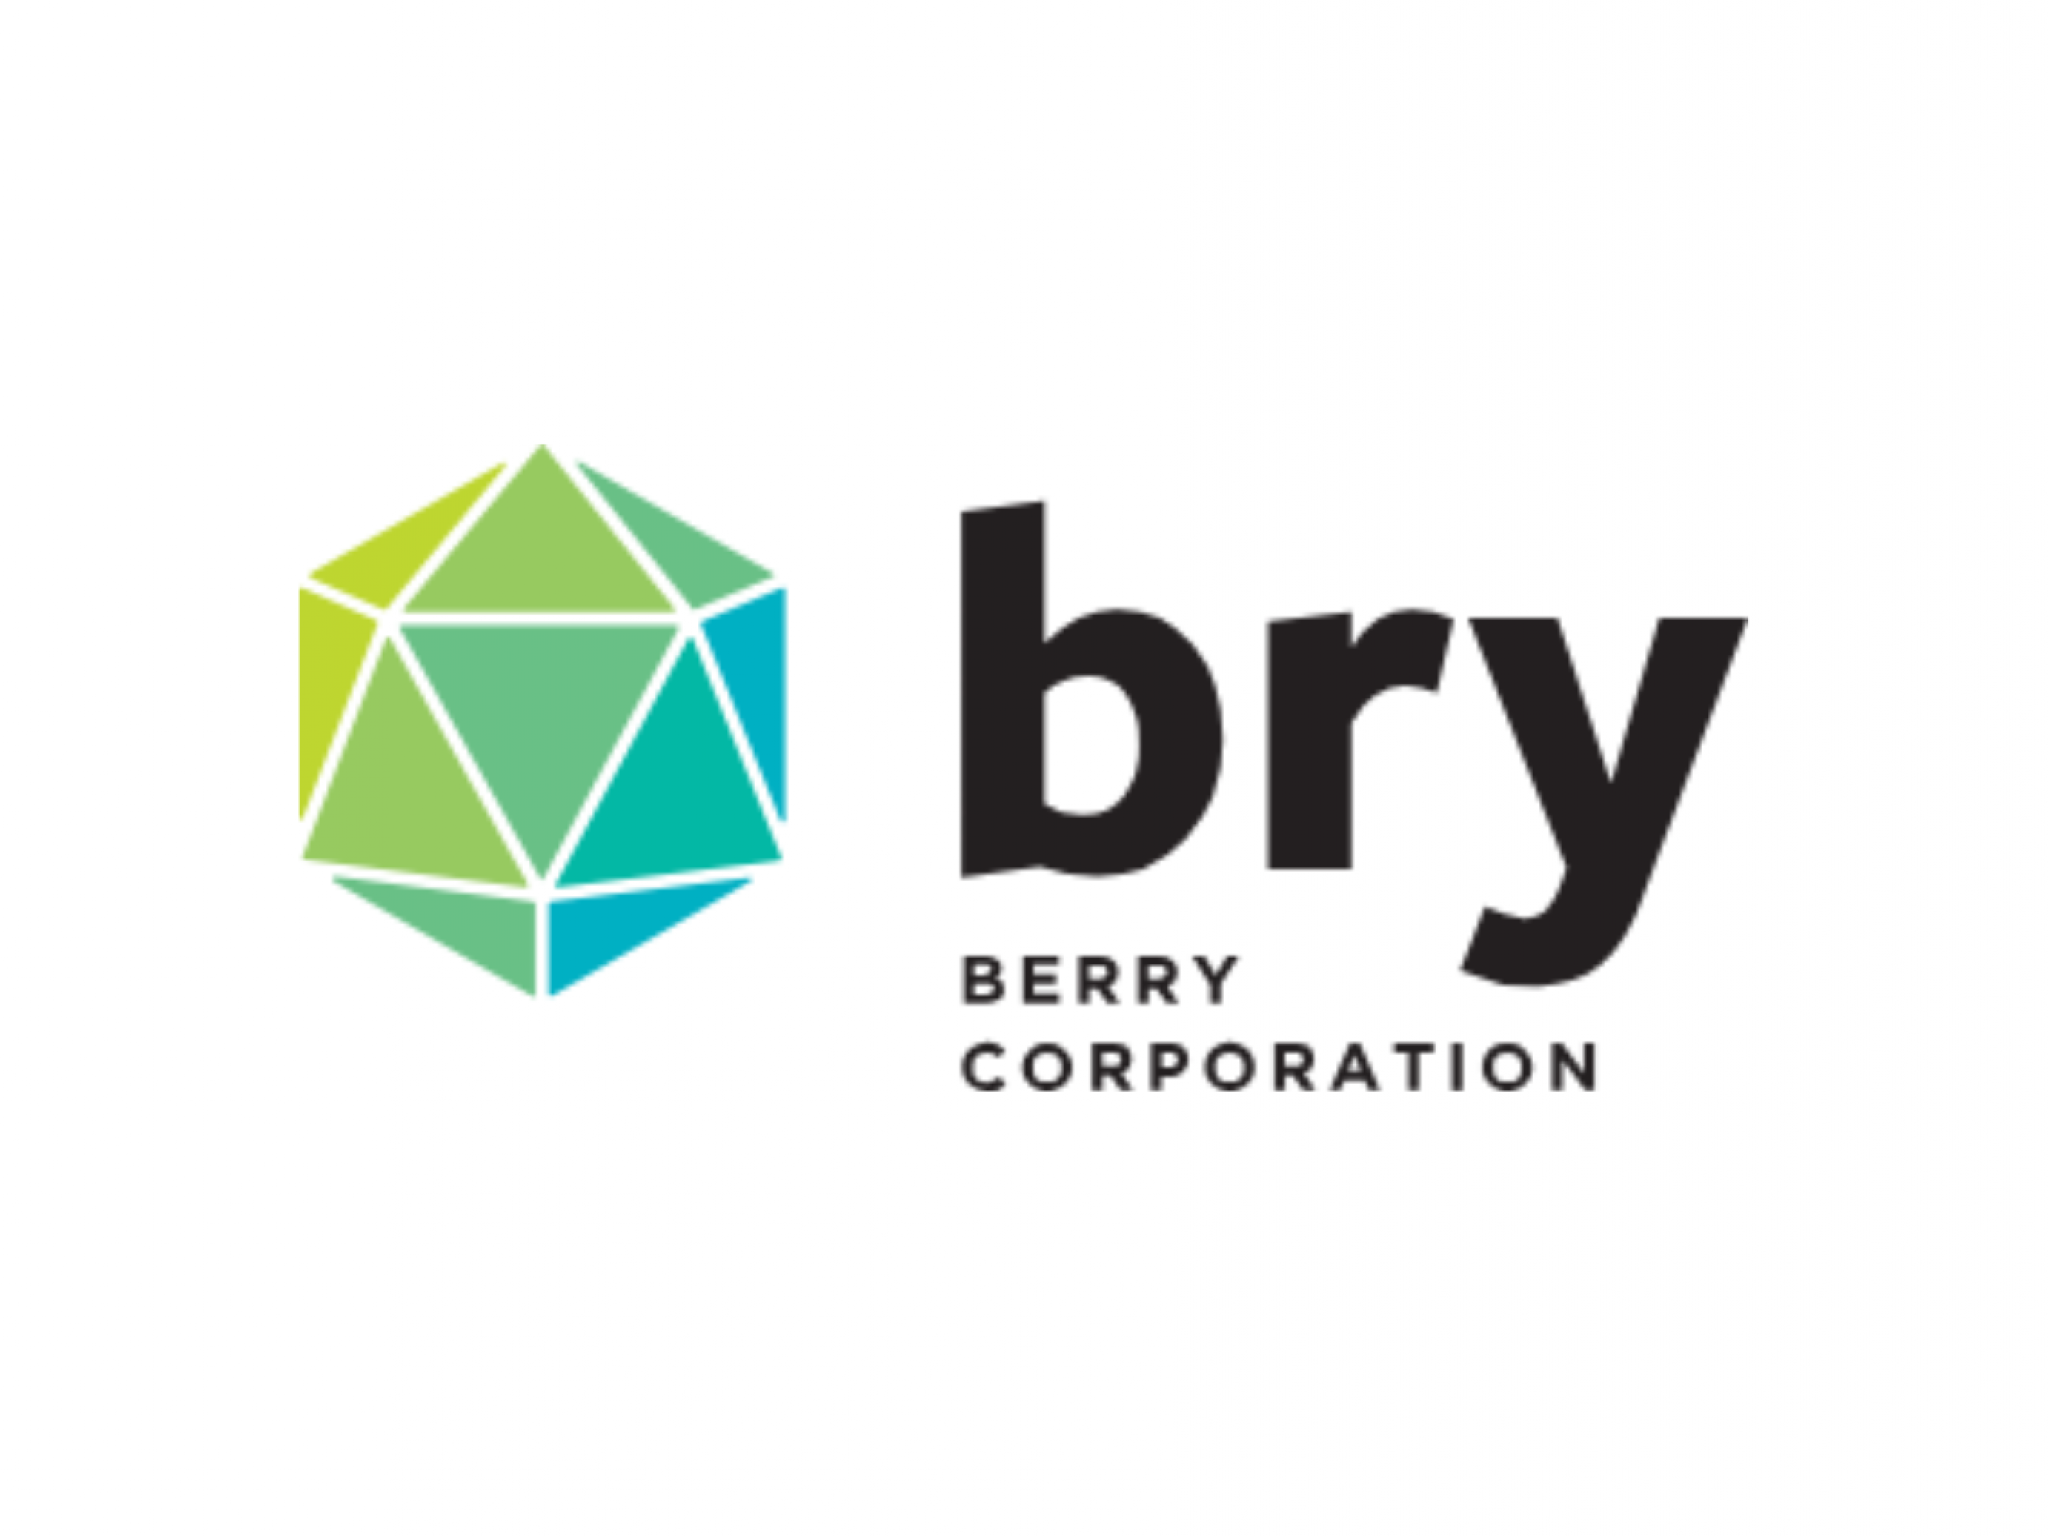  berry-updates-fy23-guidance-post-macpherson-acquisition-completion 